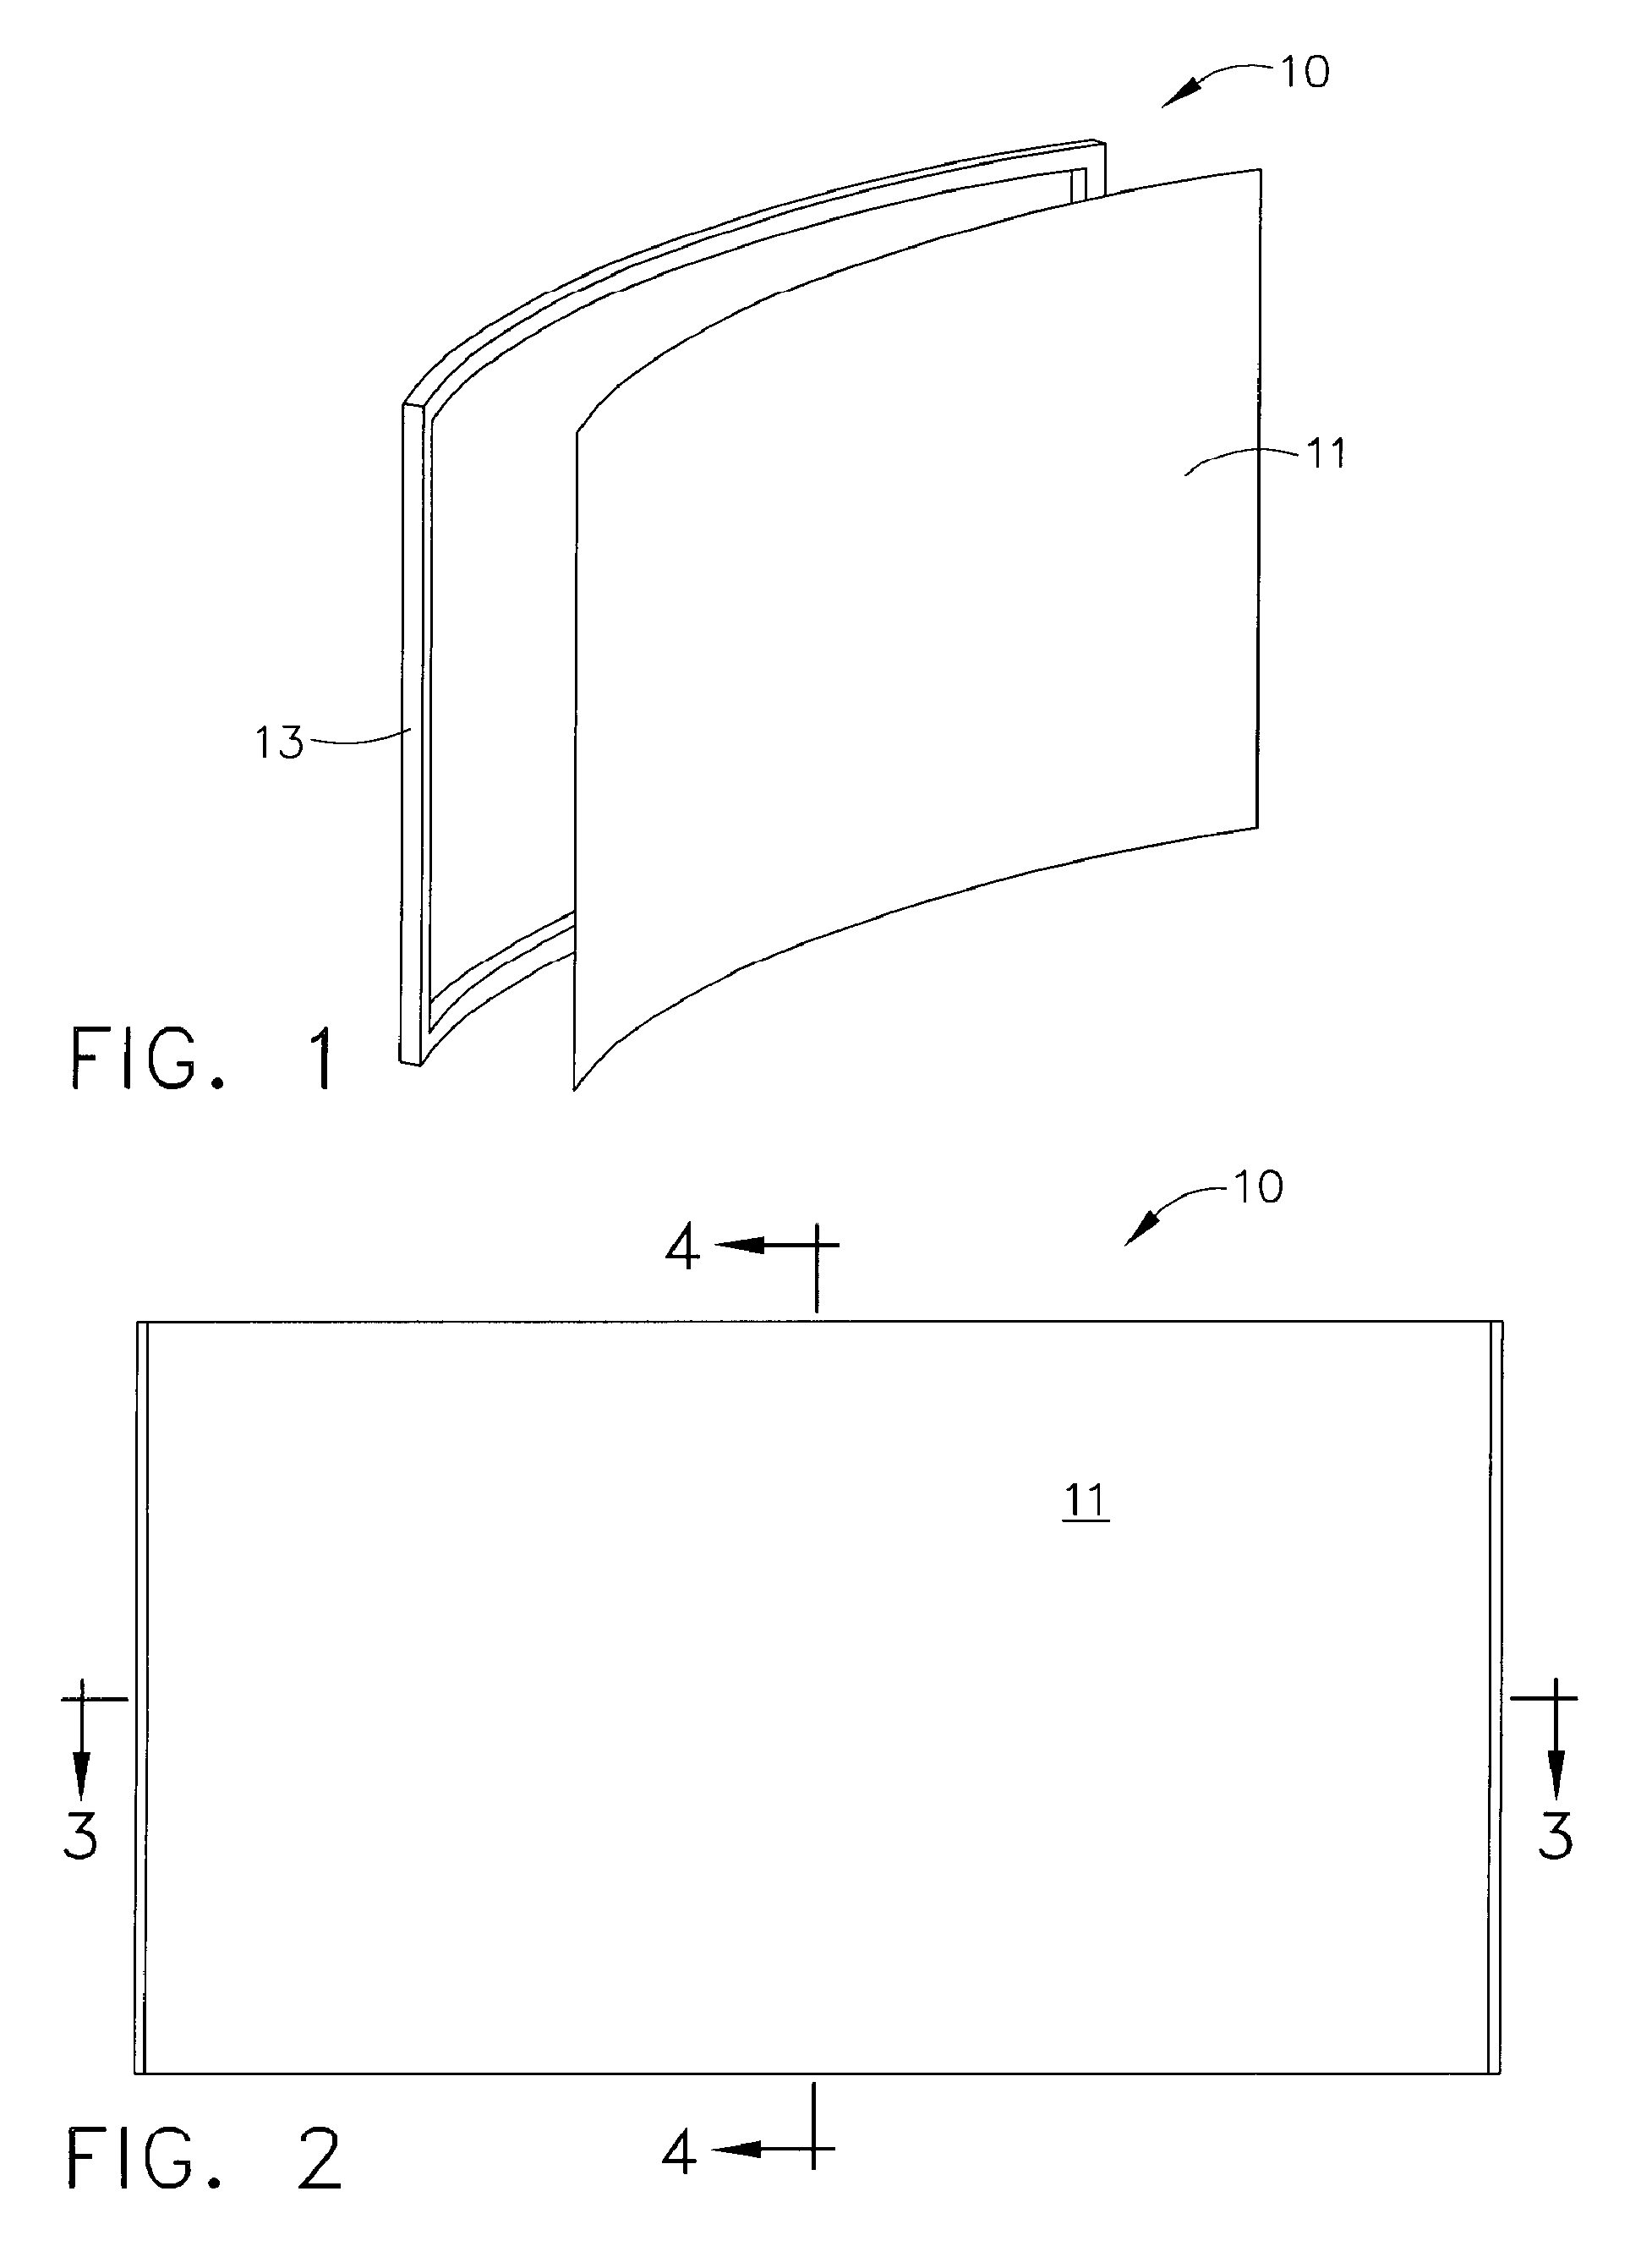 Anti-bulging projection screen structure